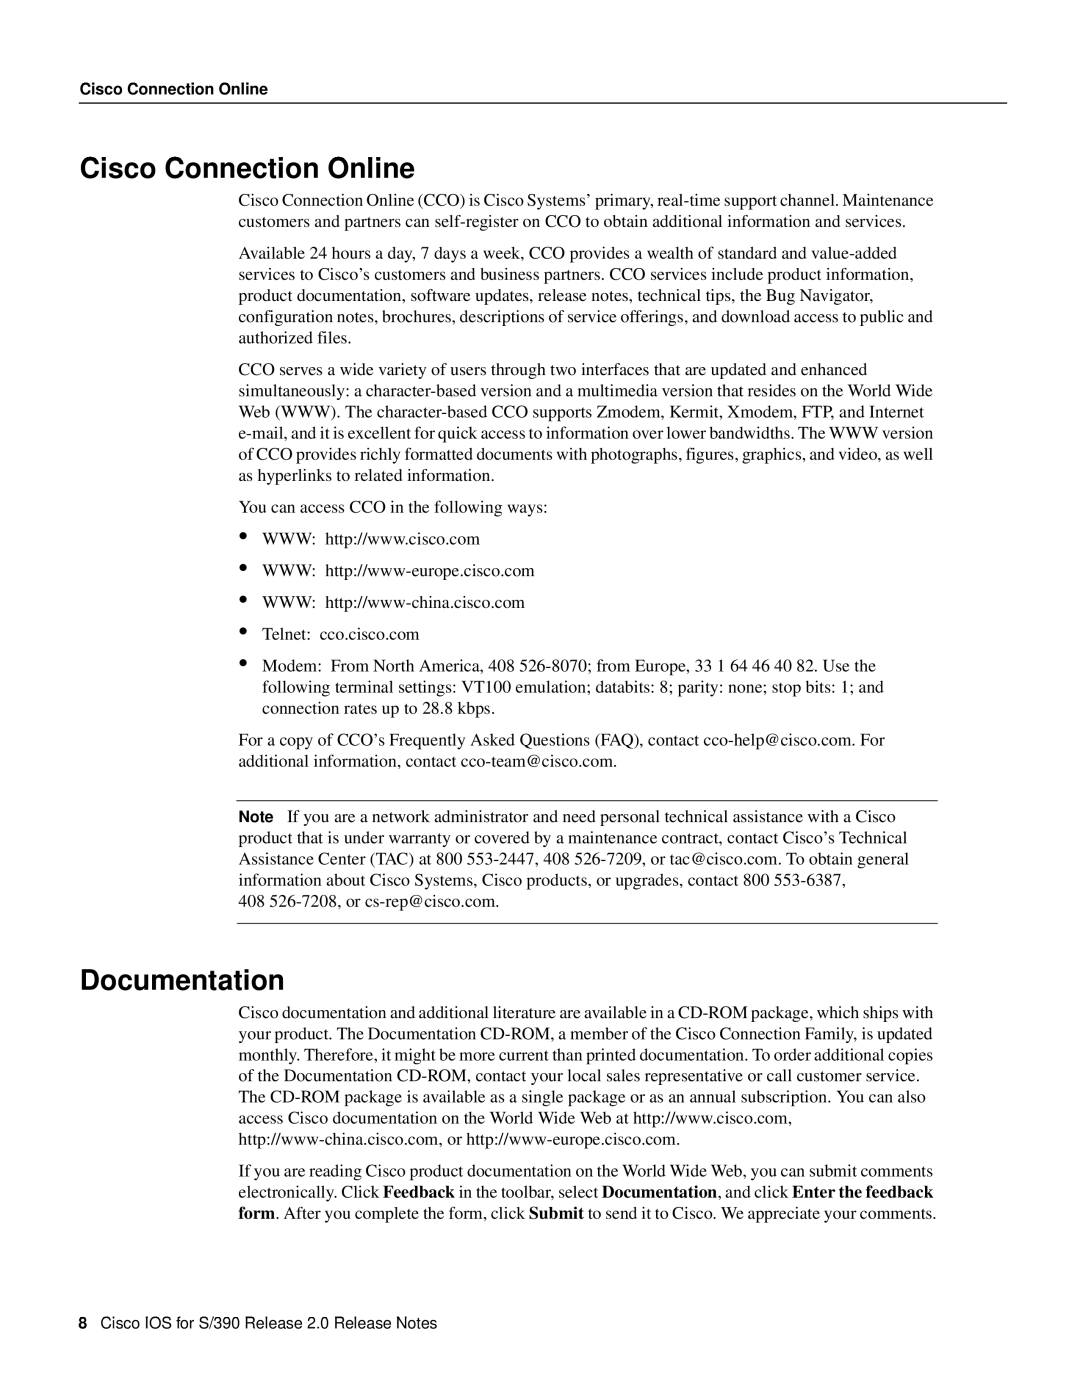 Cisco Systems S/390 manual Cisco Connection Online, Documentation 